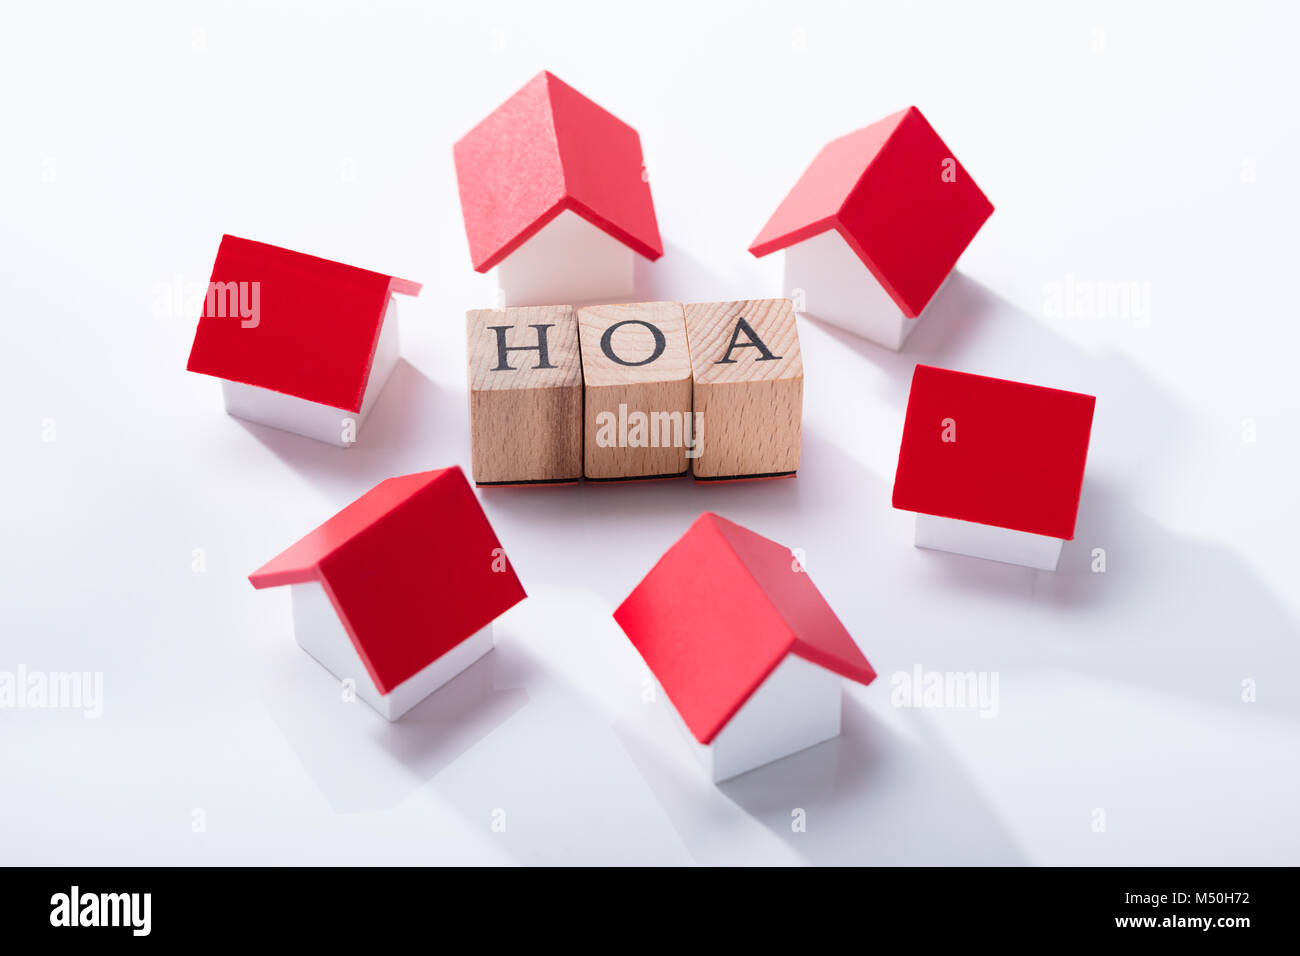 Homeowner Association Wooden Blocks Surrounded With Miniature House Models Over The White Background Stock Photo